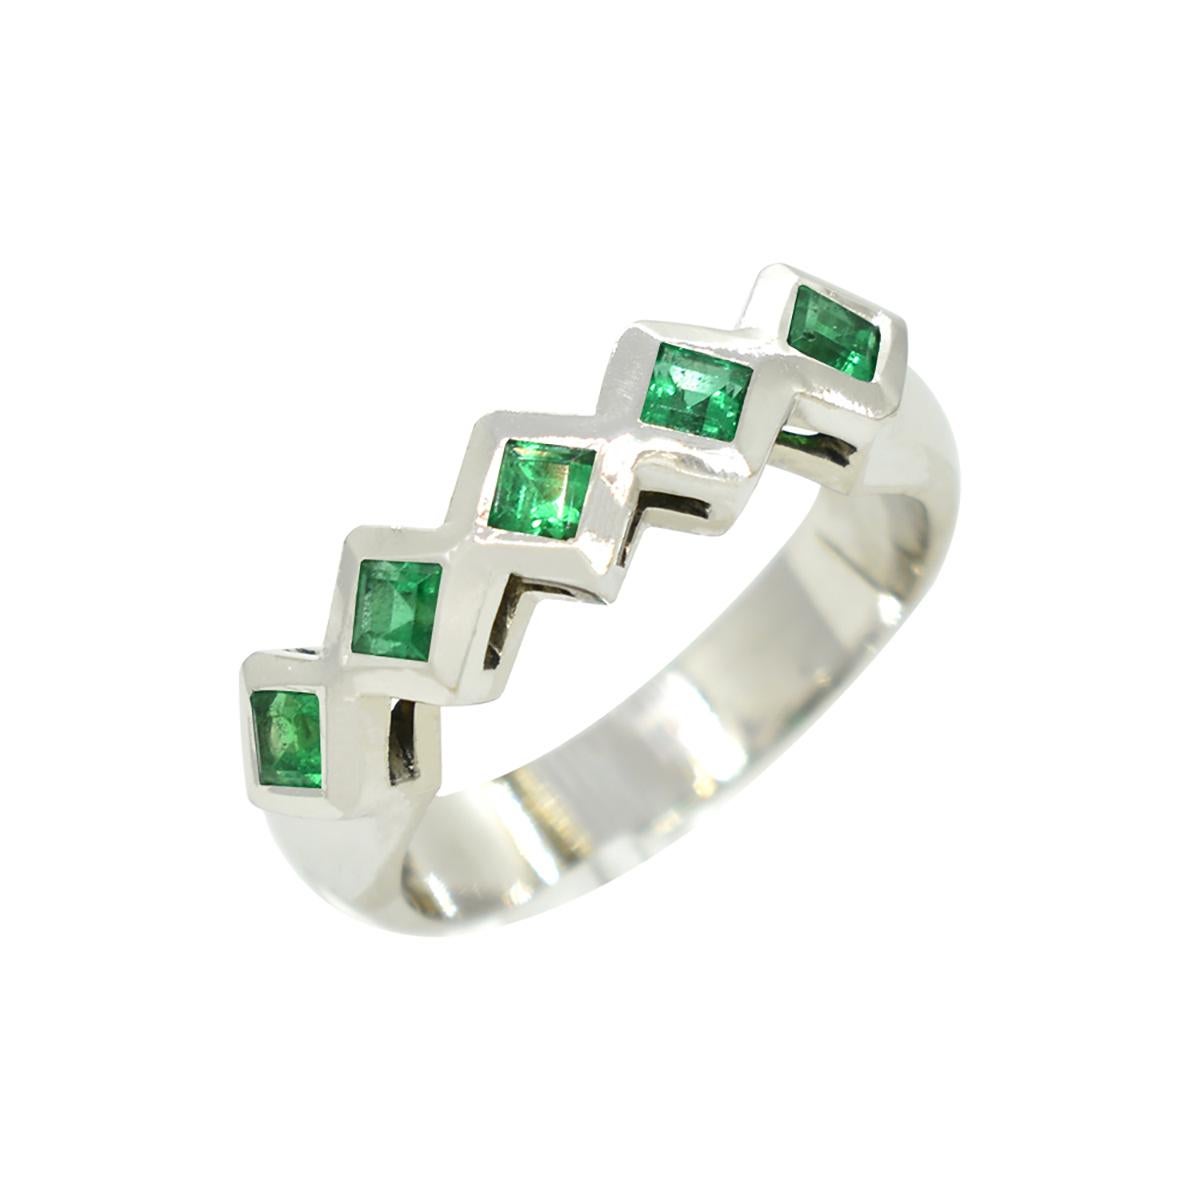 18K white gold emerald wedding band ring with a beautiful selection of 5 square cut natural Colombian emeralds in 0.37 carats total weight with a stunning medium dark green tone, good clarity, and excellent brilliance.

The emeralds are set in